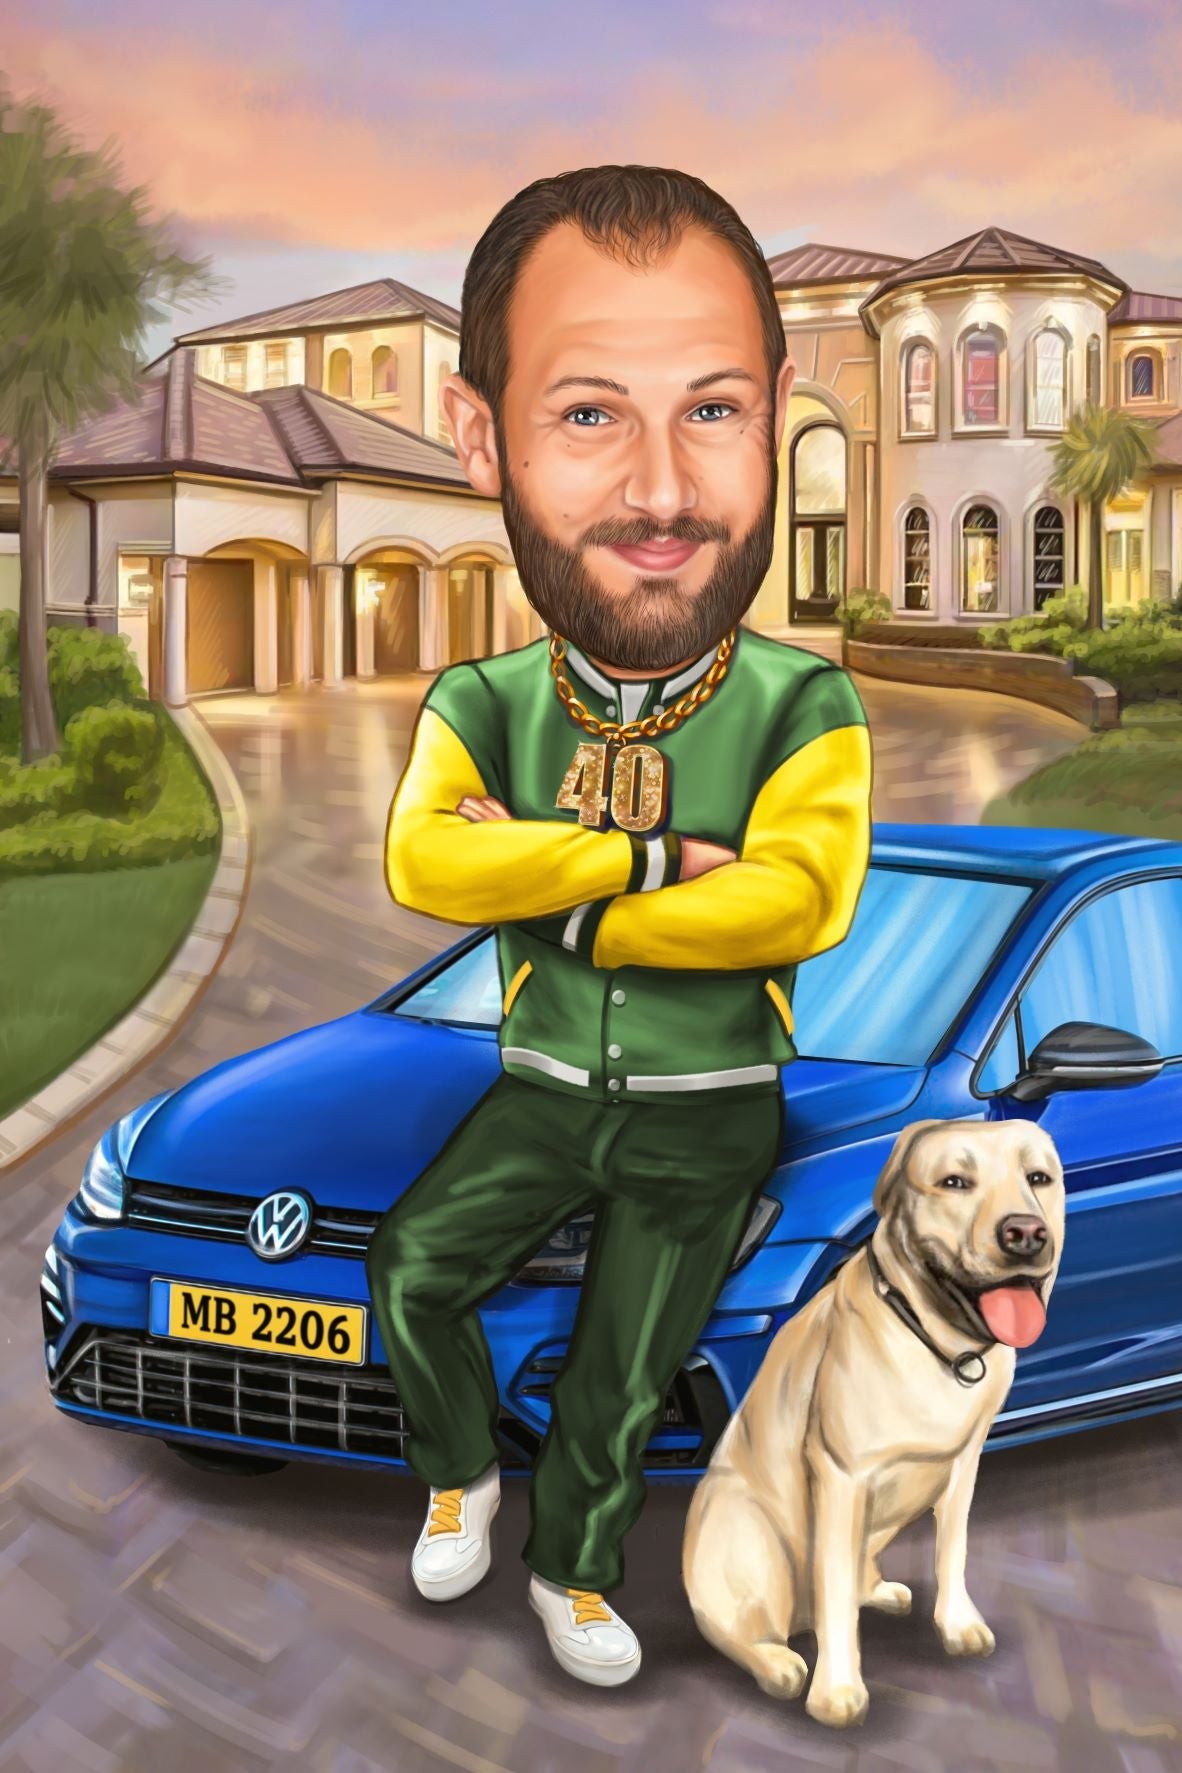 Him with the dog and the car caricature